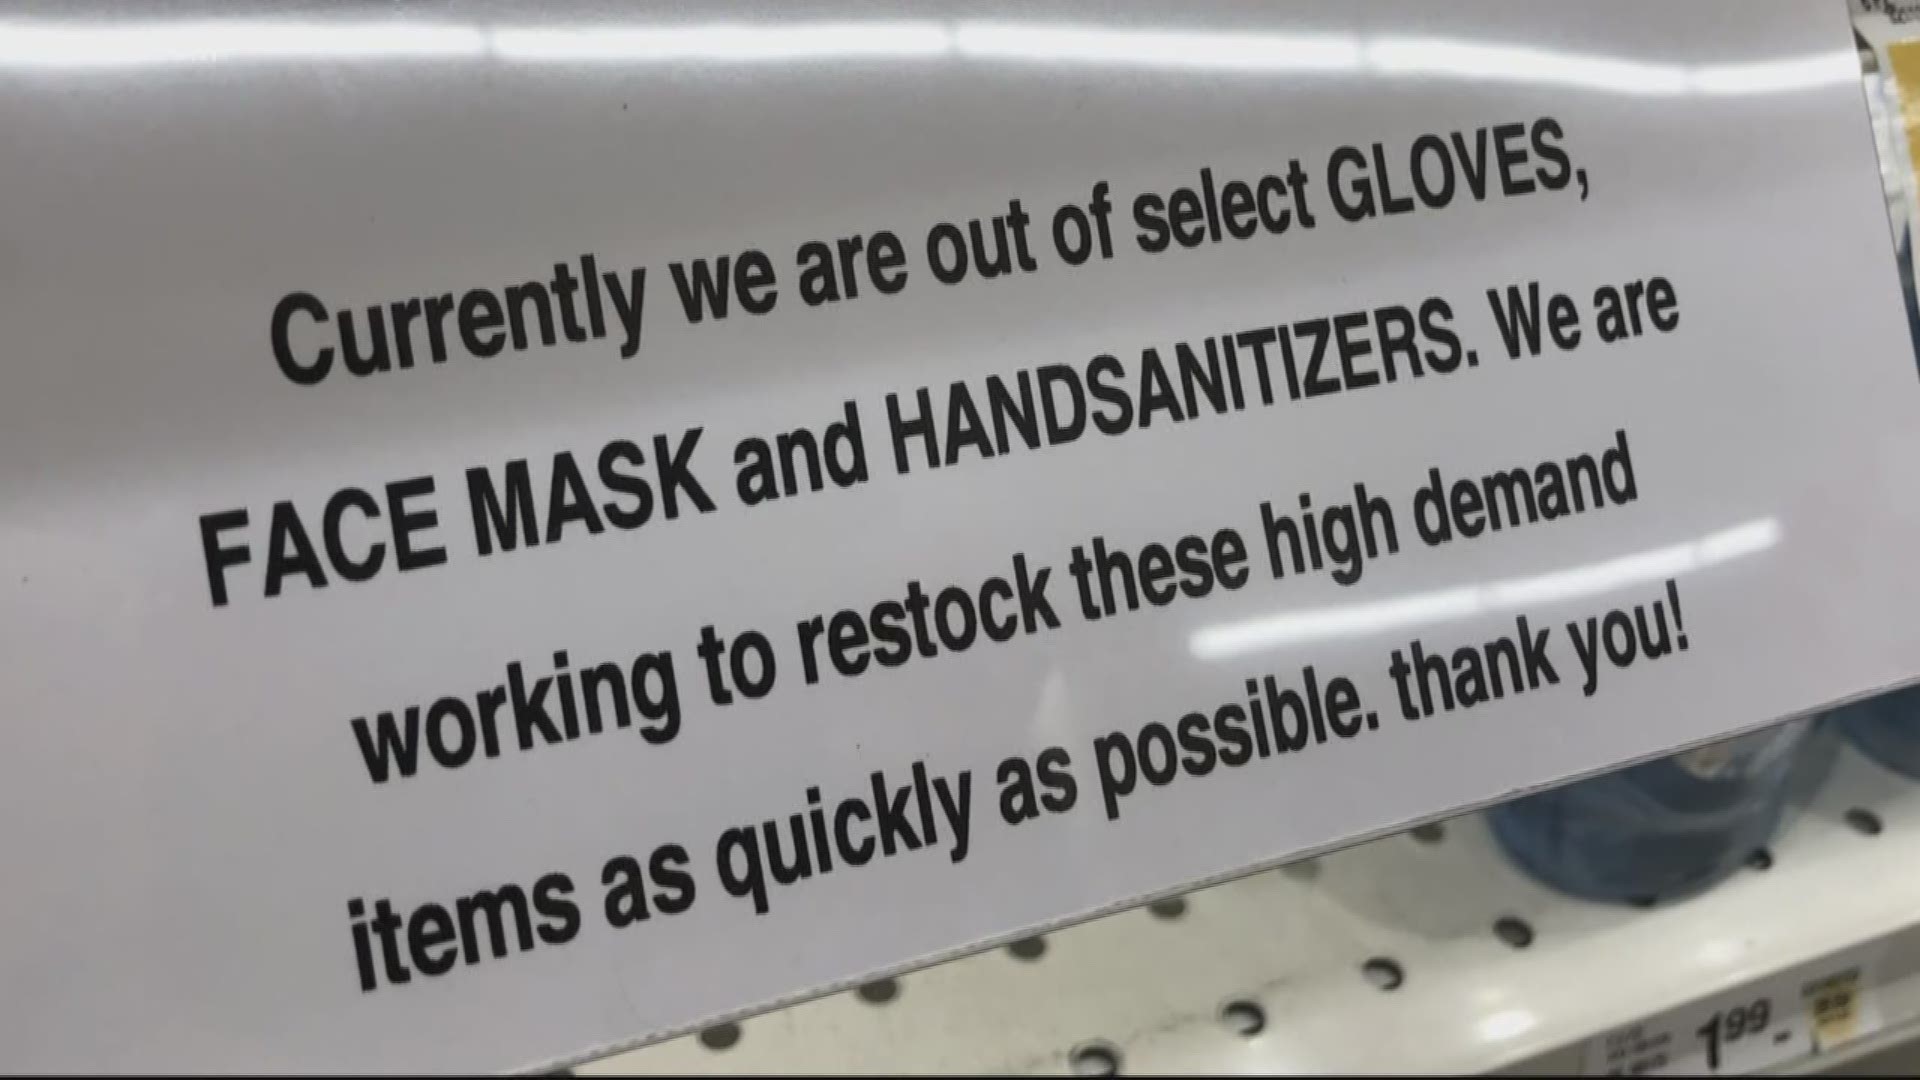 A sampling of suburban pharmacy and grocery stores in Maryland found empty store shelves as people buy up supplies of surgical masks, hand sanitizer and gloves.